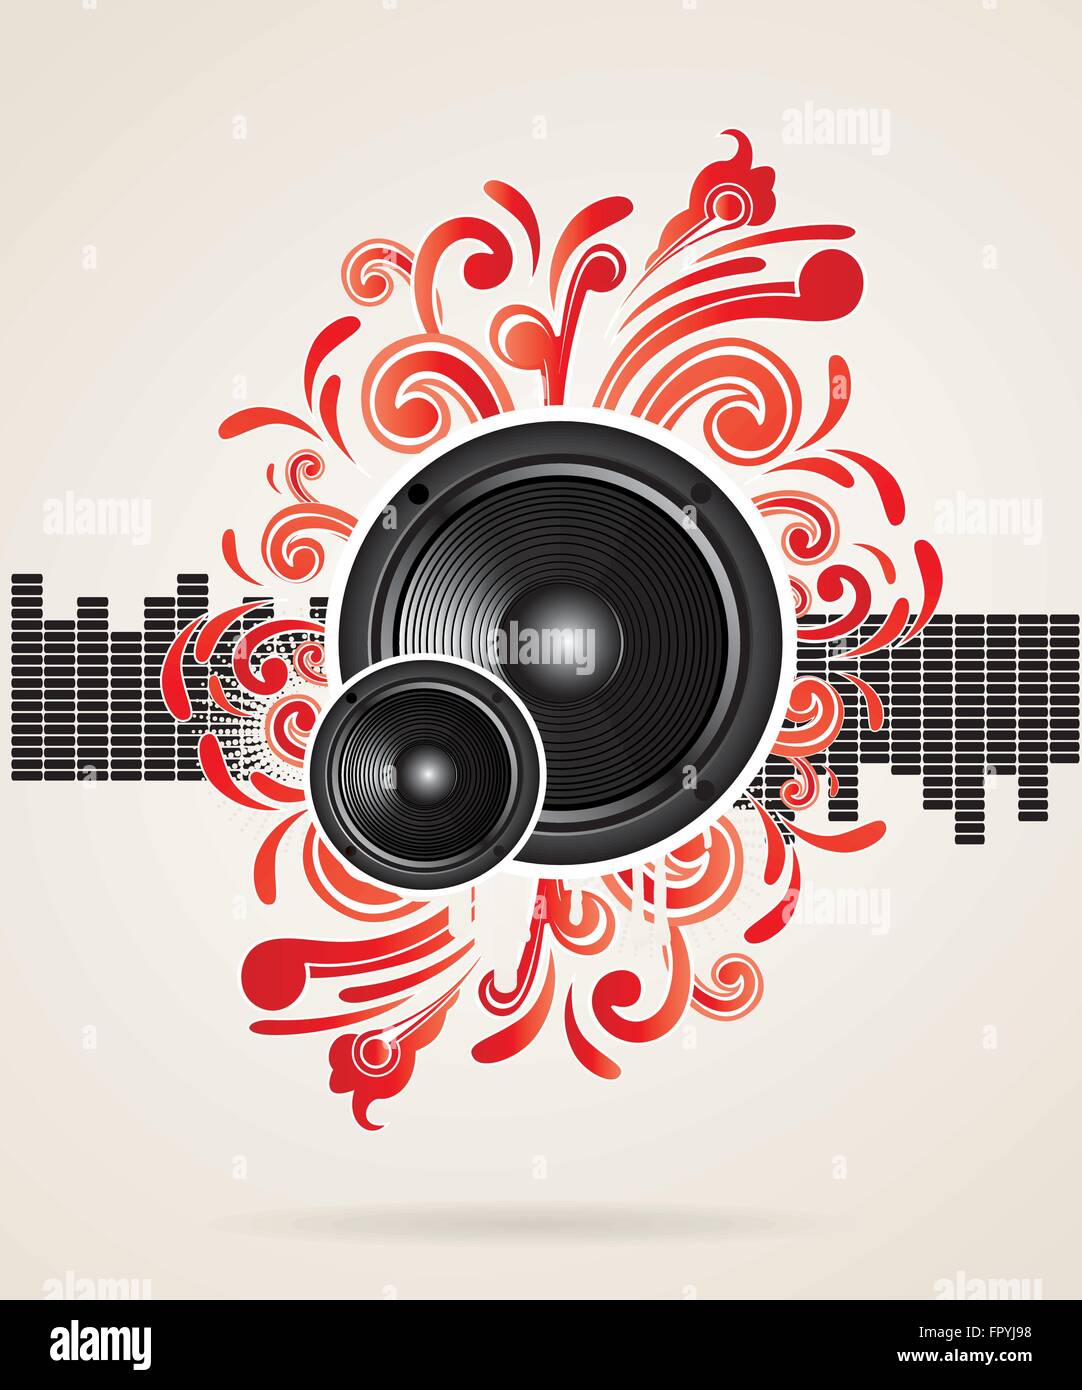 illustration for a musical theme with speakers and swirls Stock Vector